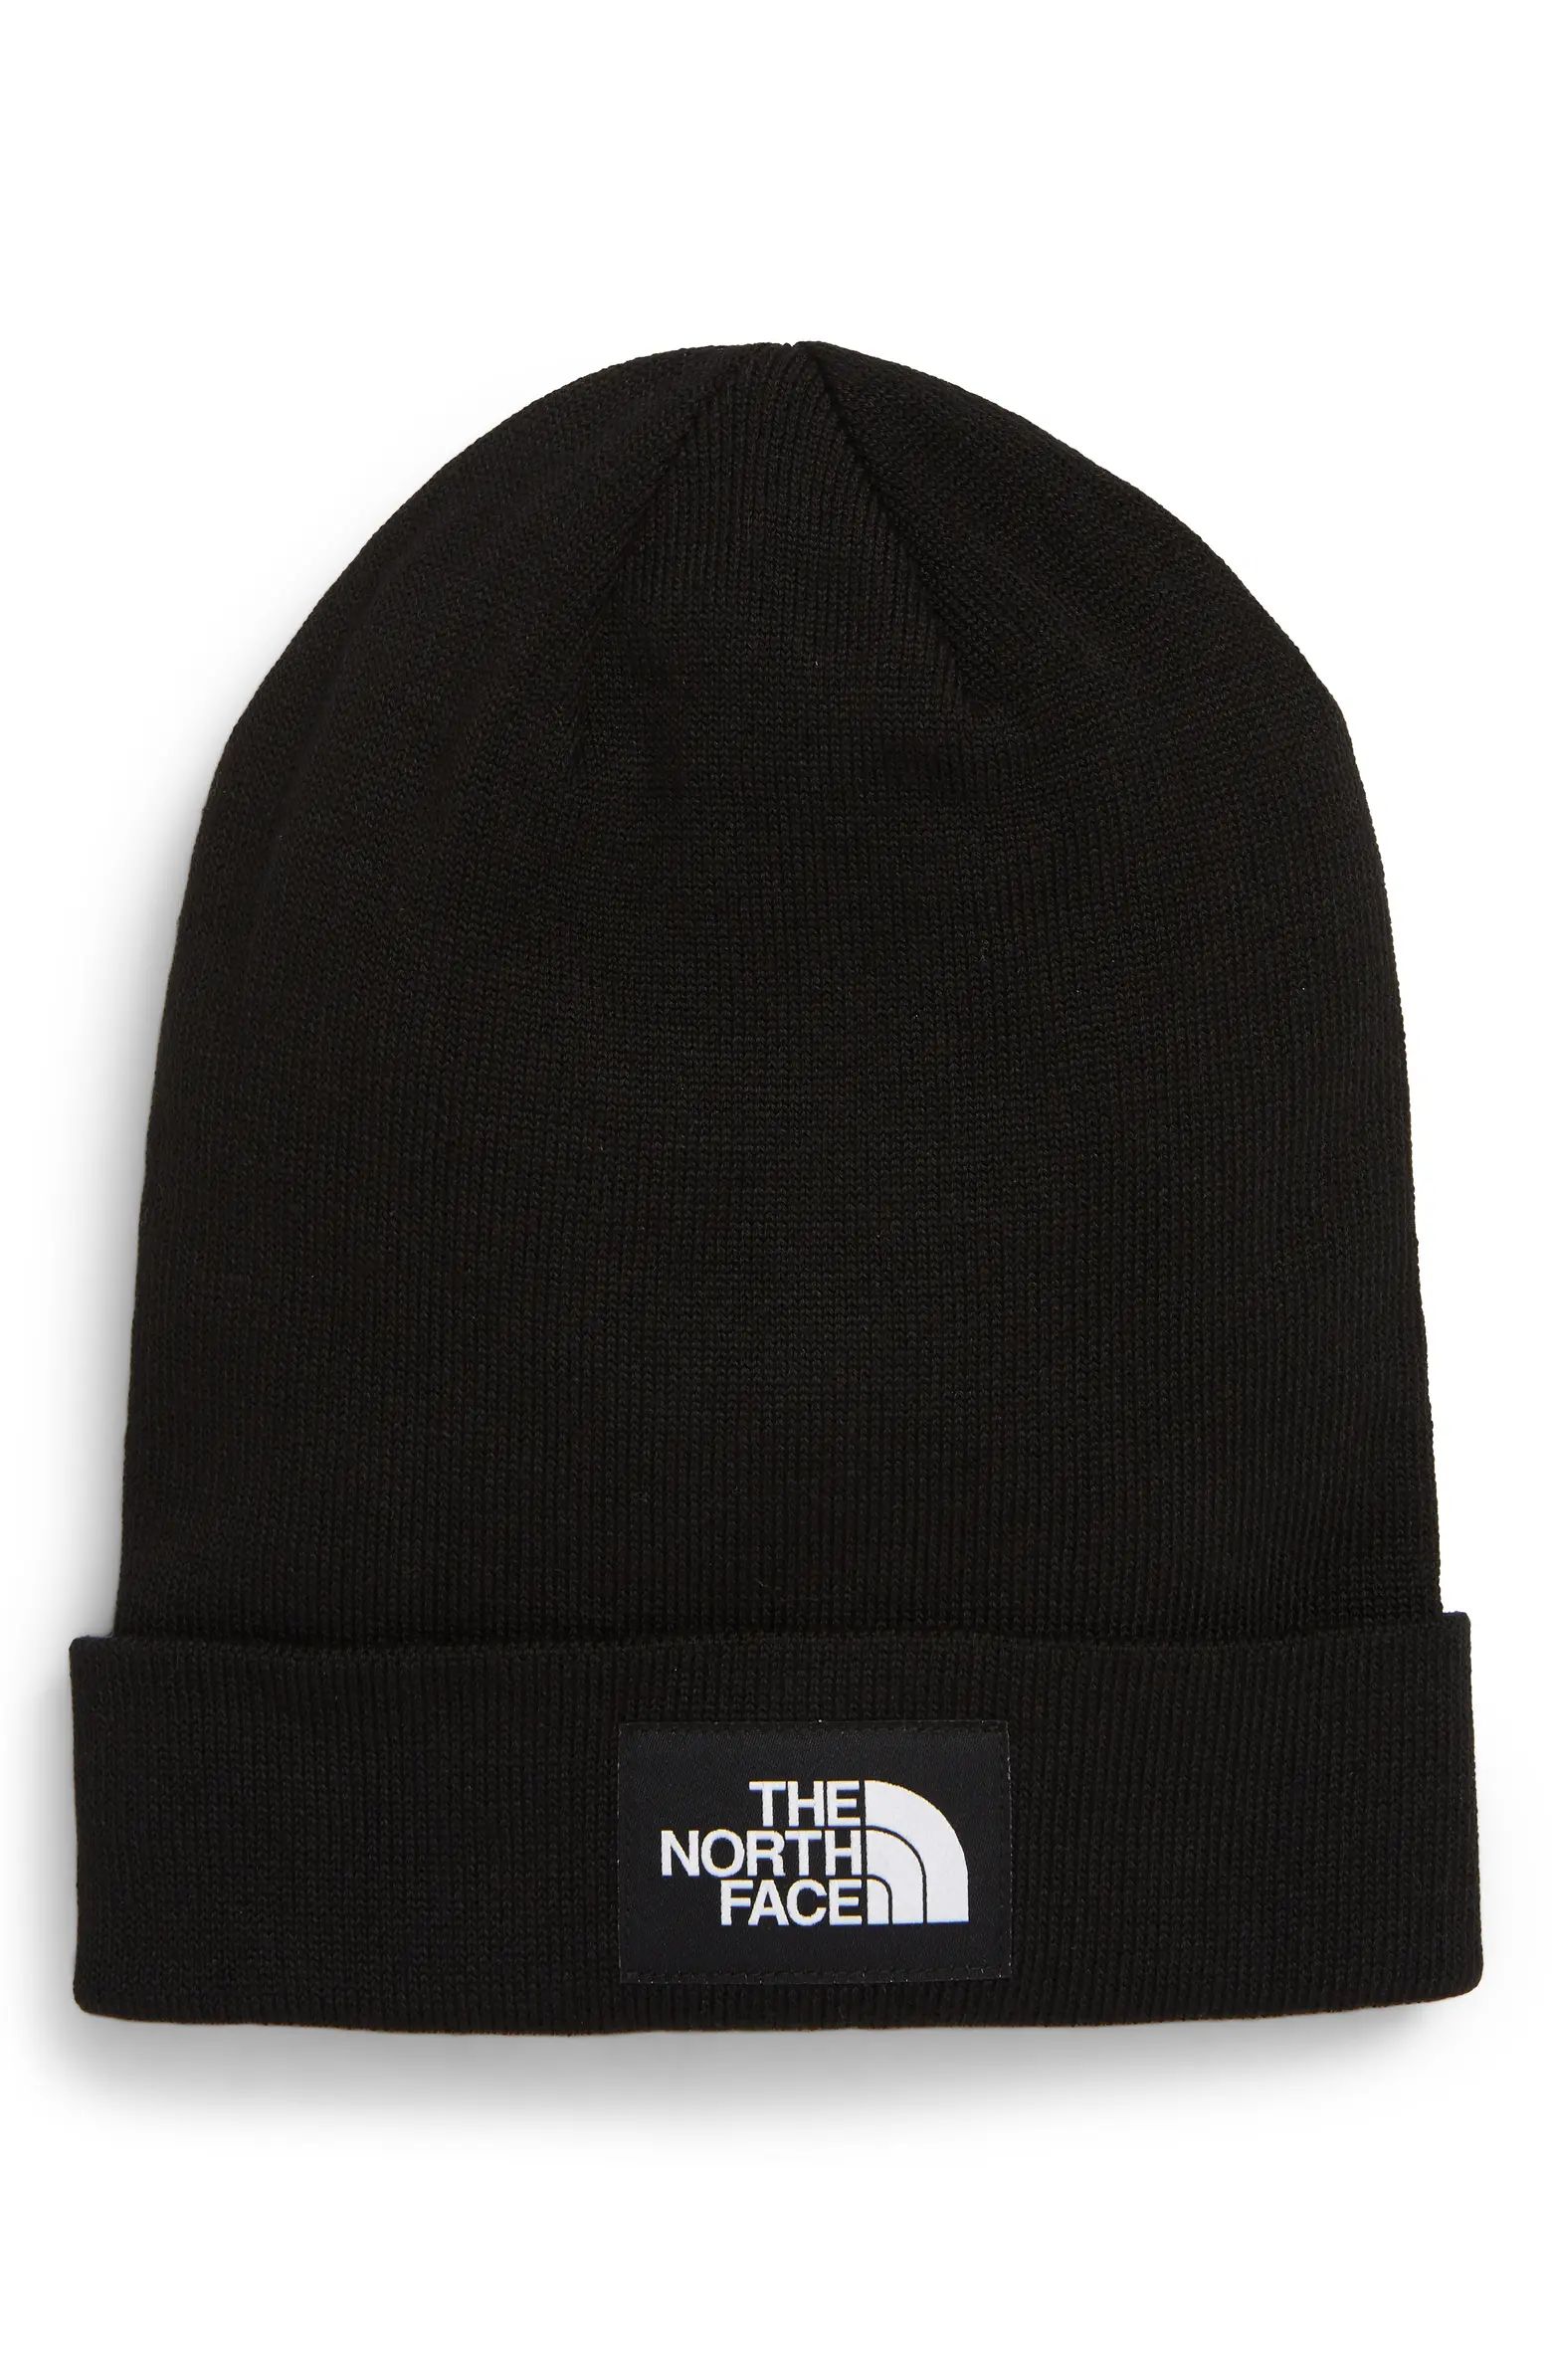 The North Face Dock Worker Recycled Beanie | Nordstrom | Nordstrom